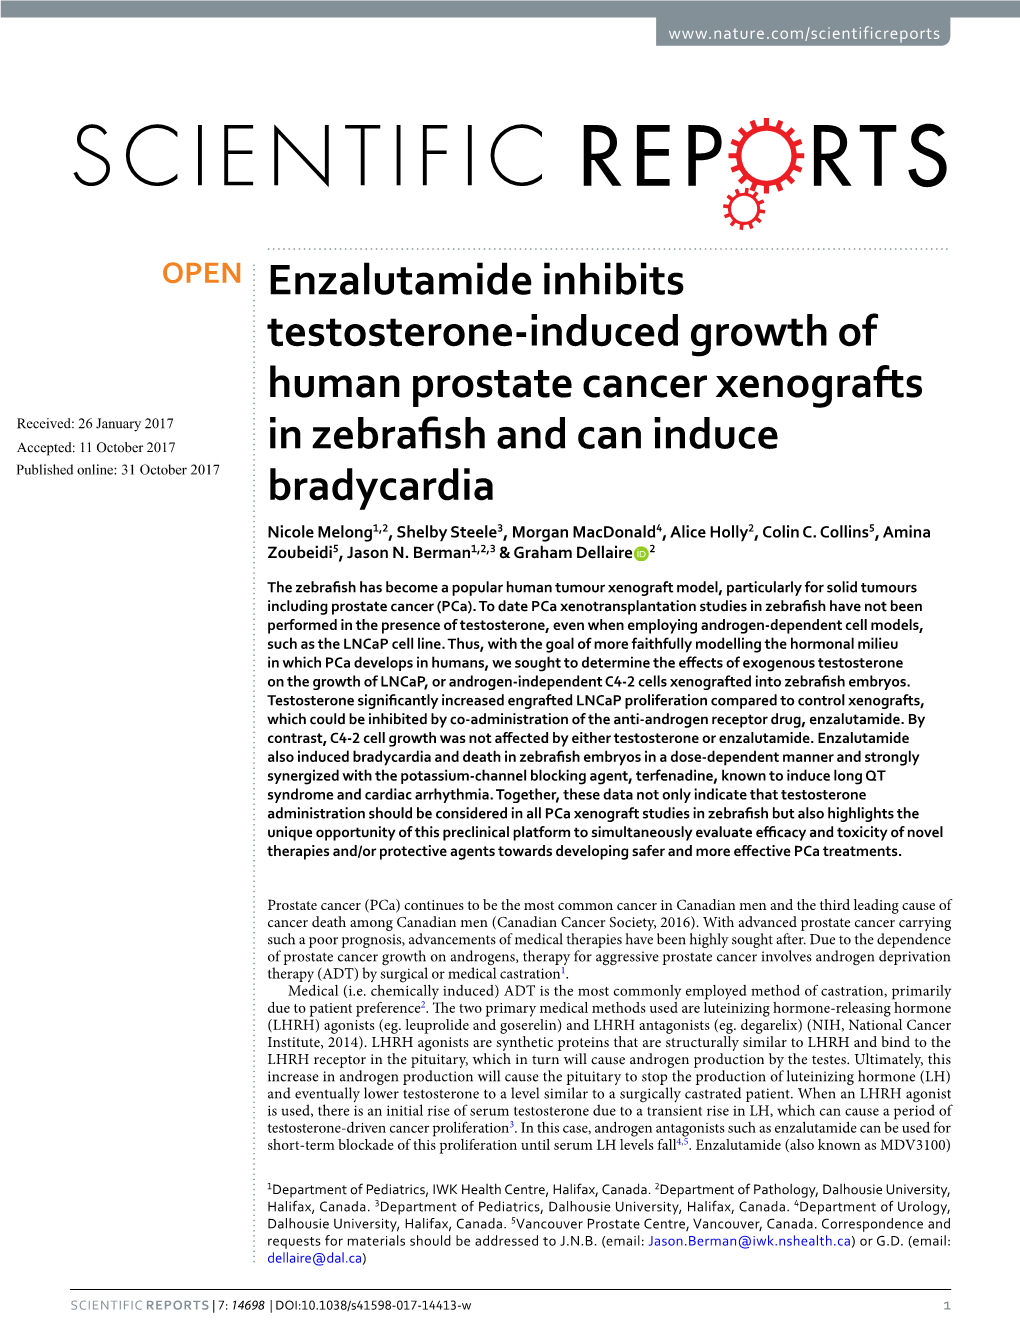 Enzalutamide Inhibits Testosterone-Induced Growth Of